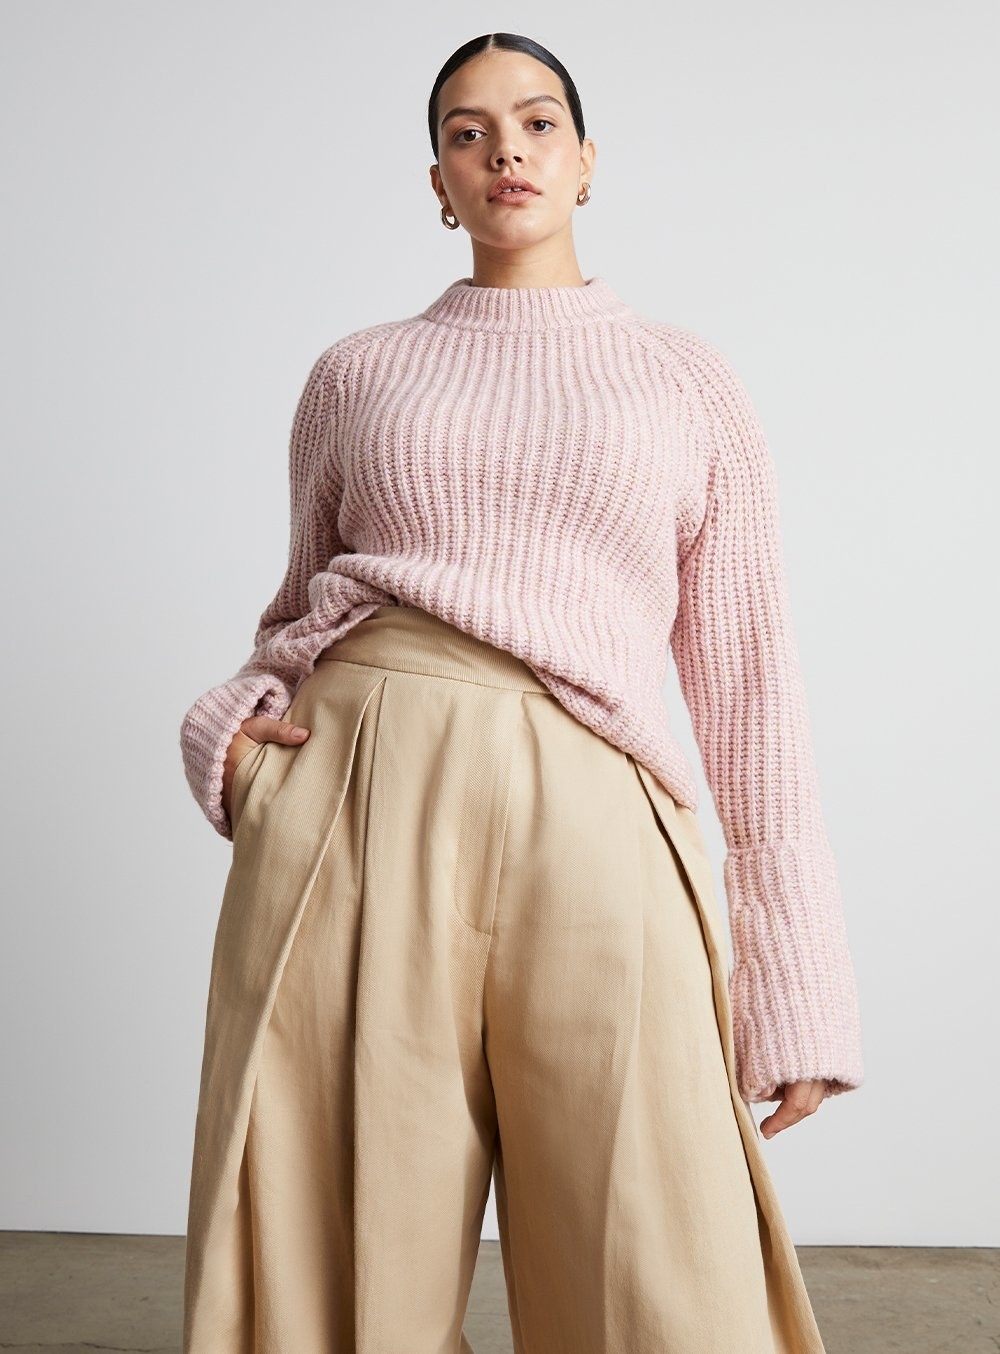 a model in a light pink sweater with oversized sleeves